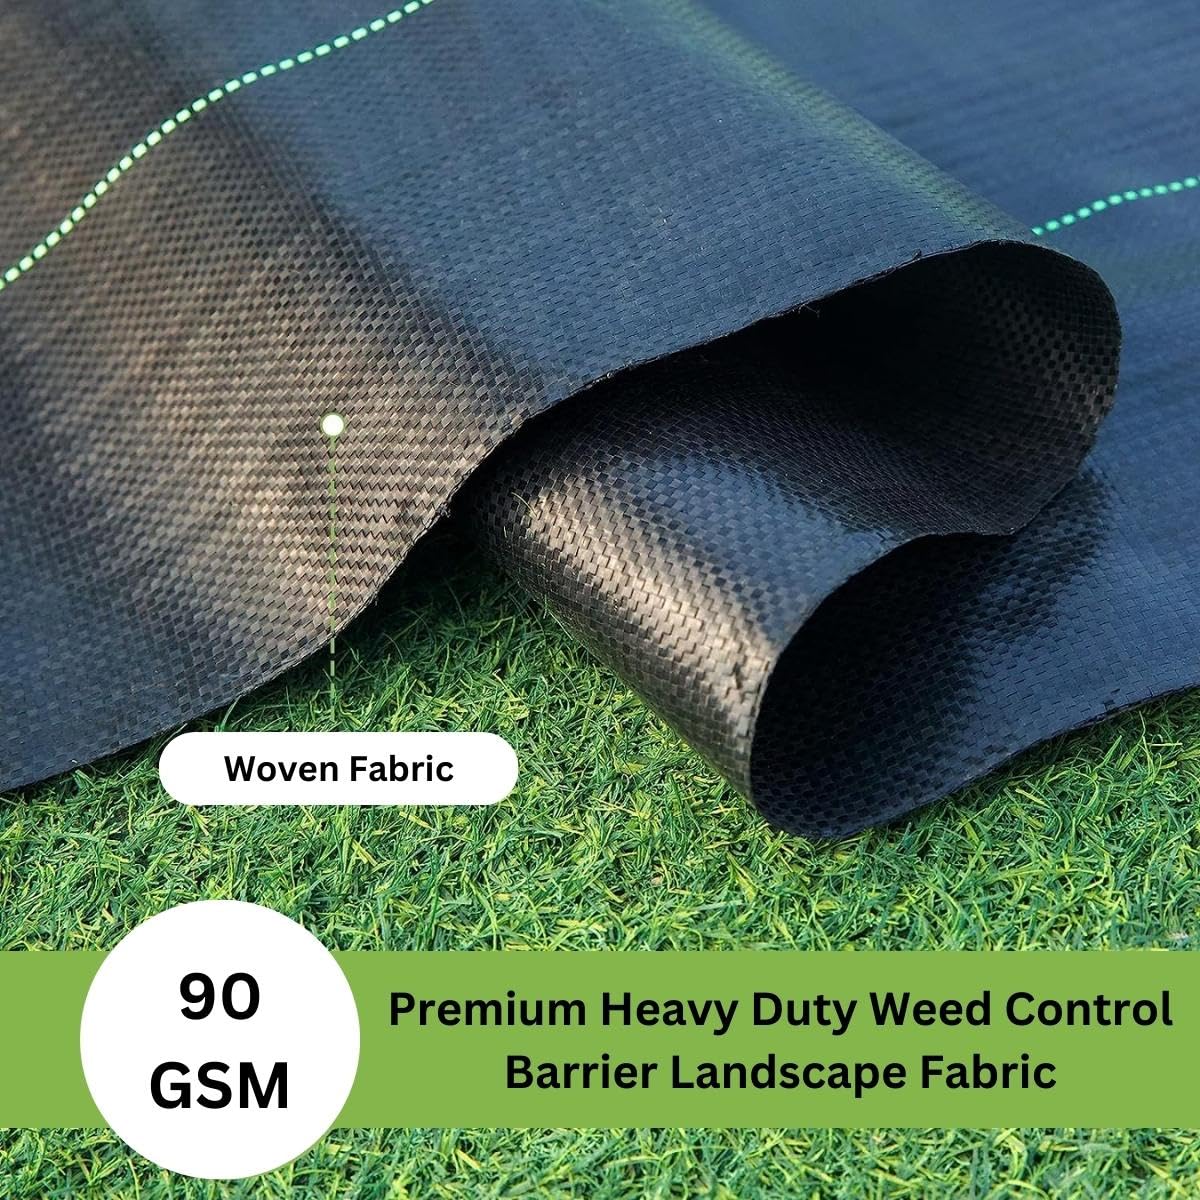 Singhal Premium Garden Weed Control Barrier Sheet Mat 2 x 25 Mtr, Landscape Fabric 90 GSM Heavy Duty Weed Block Gardening Mat for Gardens, Agriculture, Outdoor Projects (Black) (2x25 Meter)